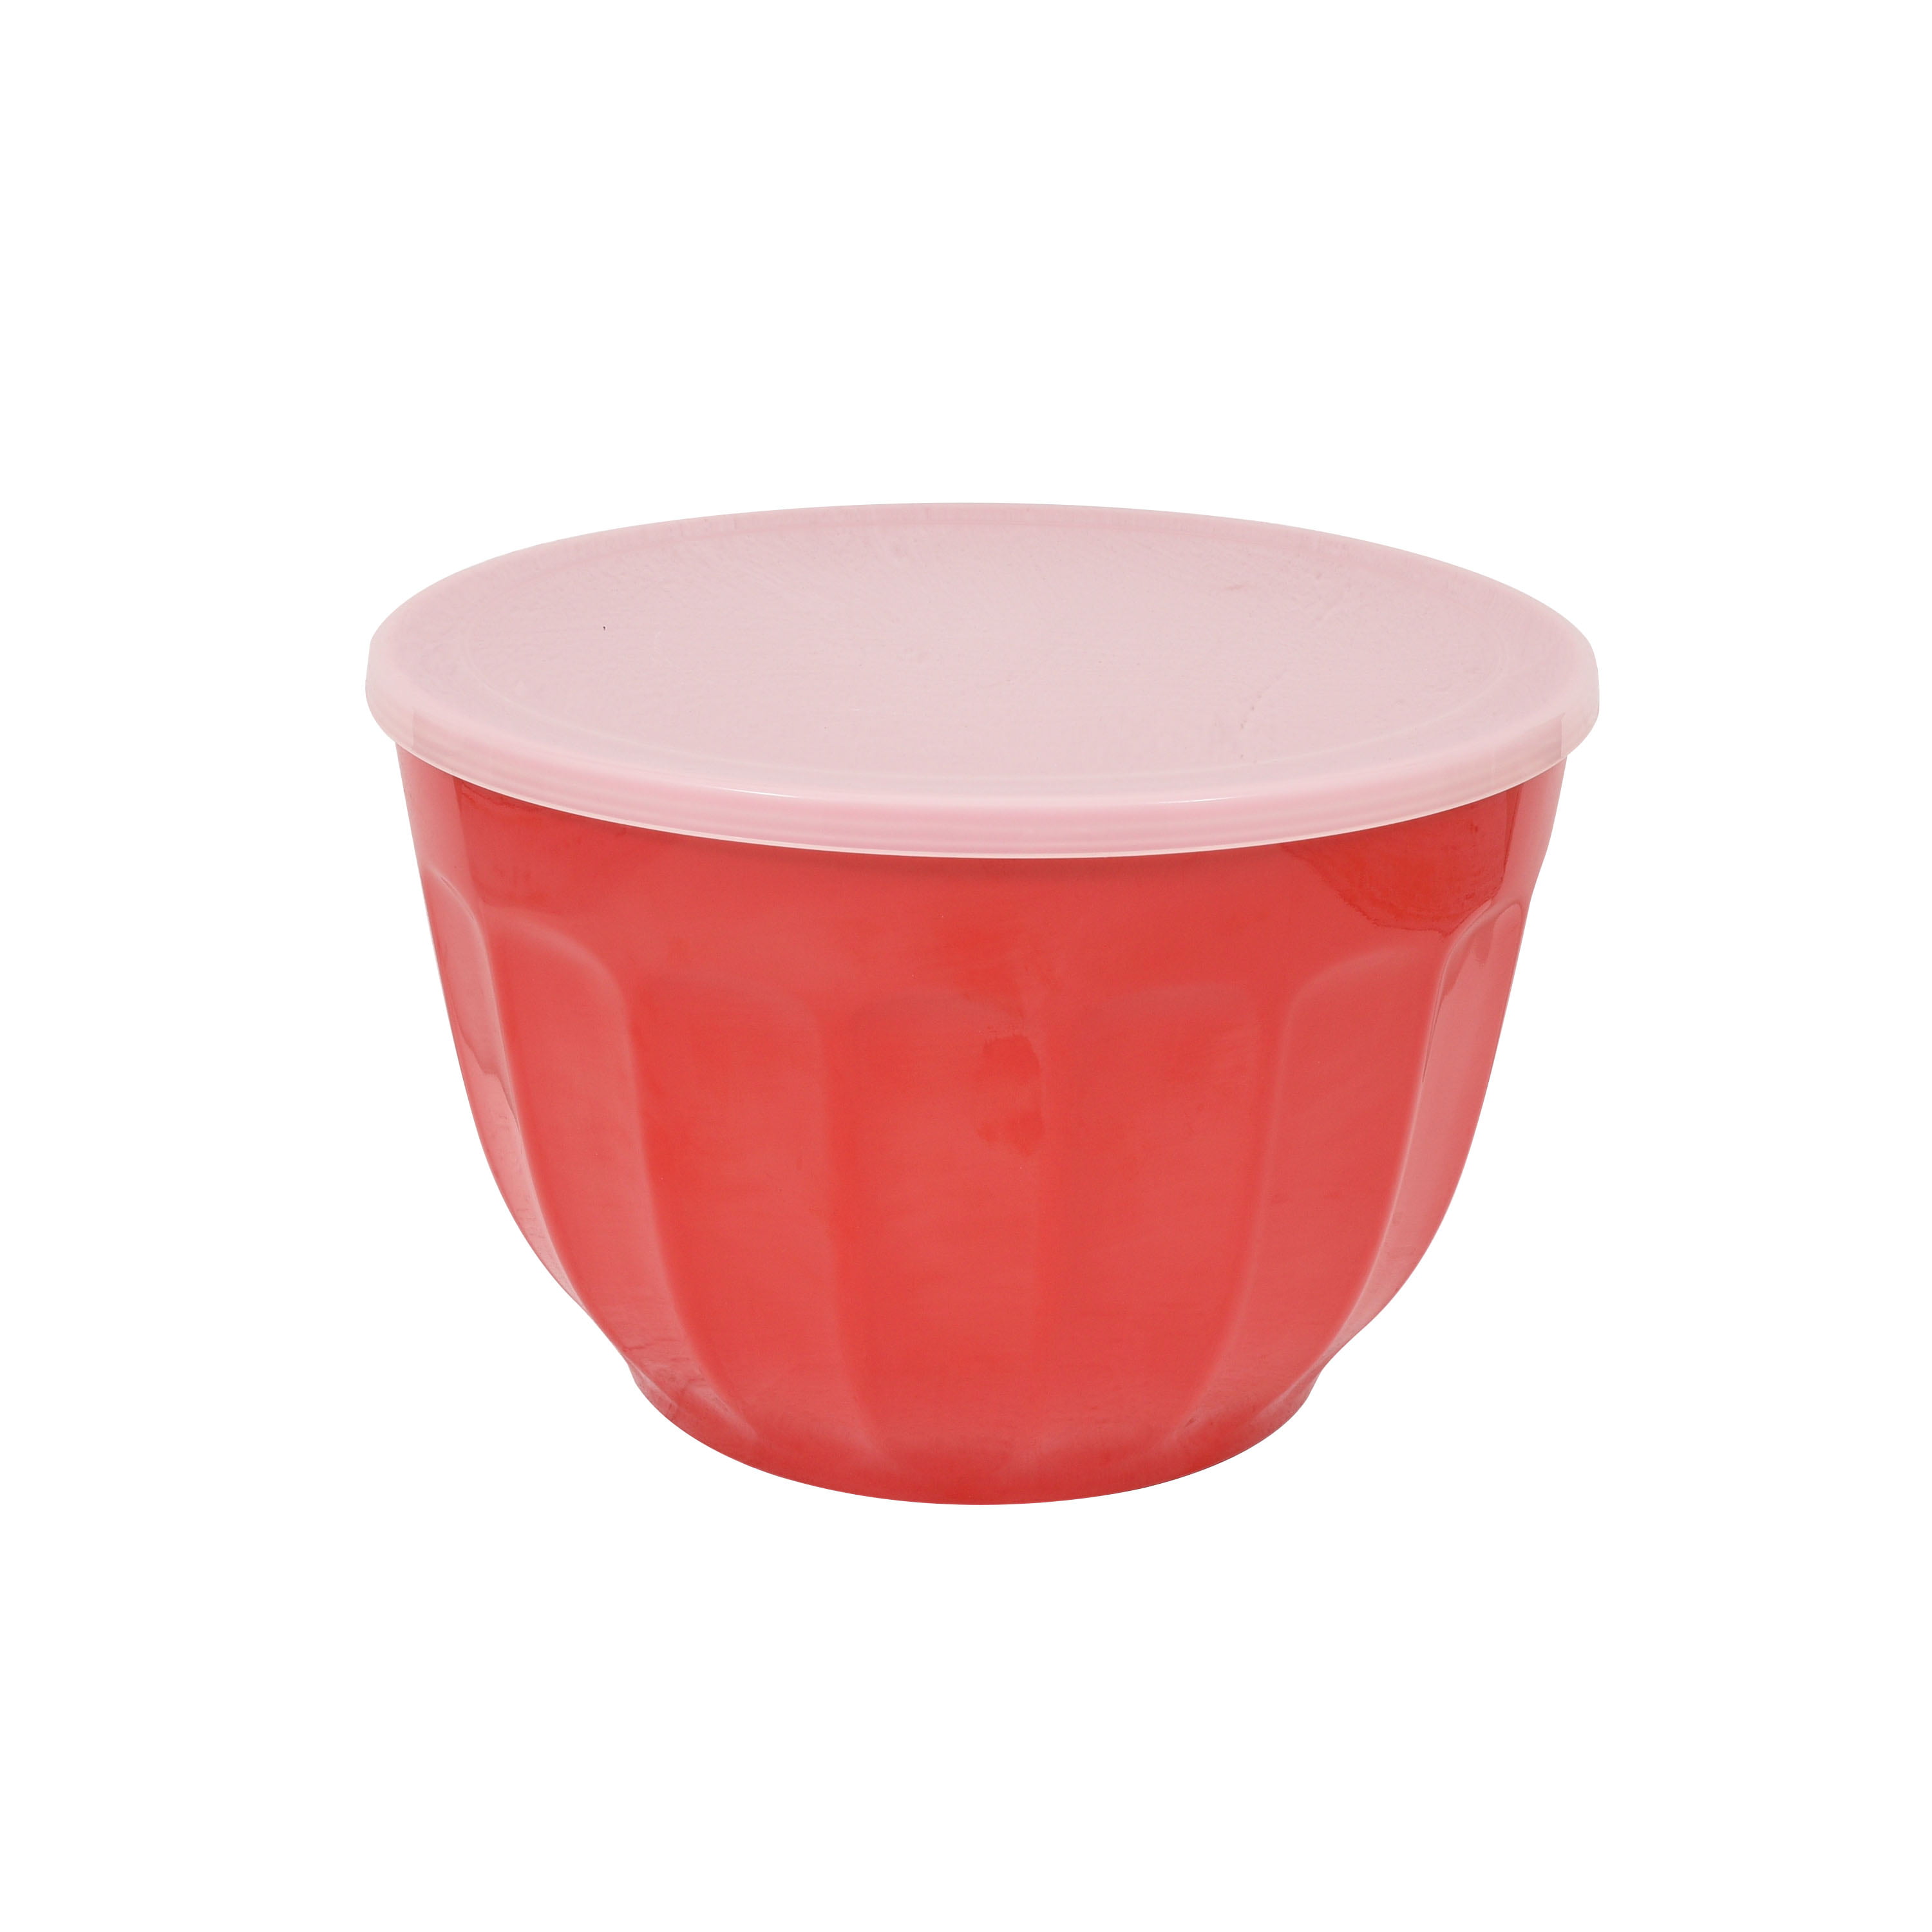 10 Strawberry Street Melamine Colored Mixing Bowls with Lids (Set of 6) -  Bed Bath & Beyond - 8075296